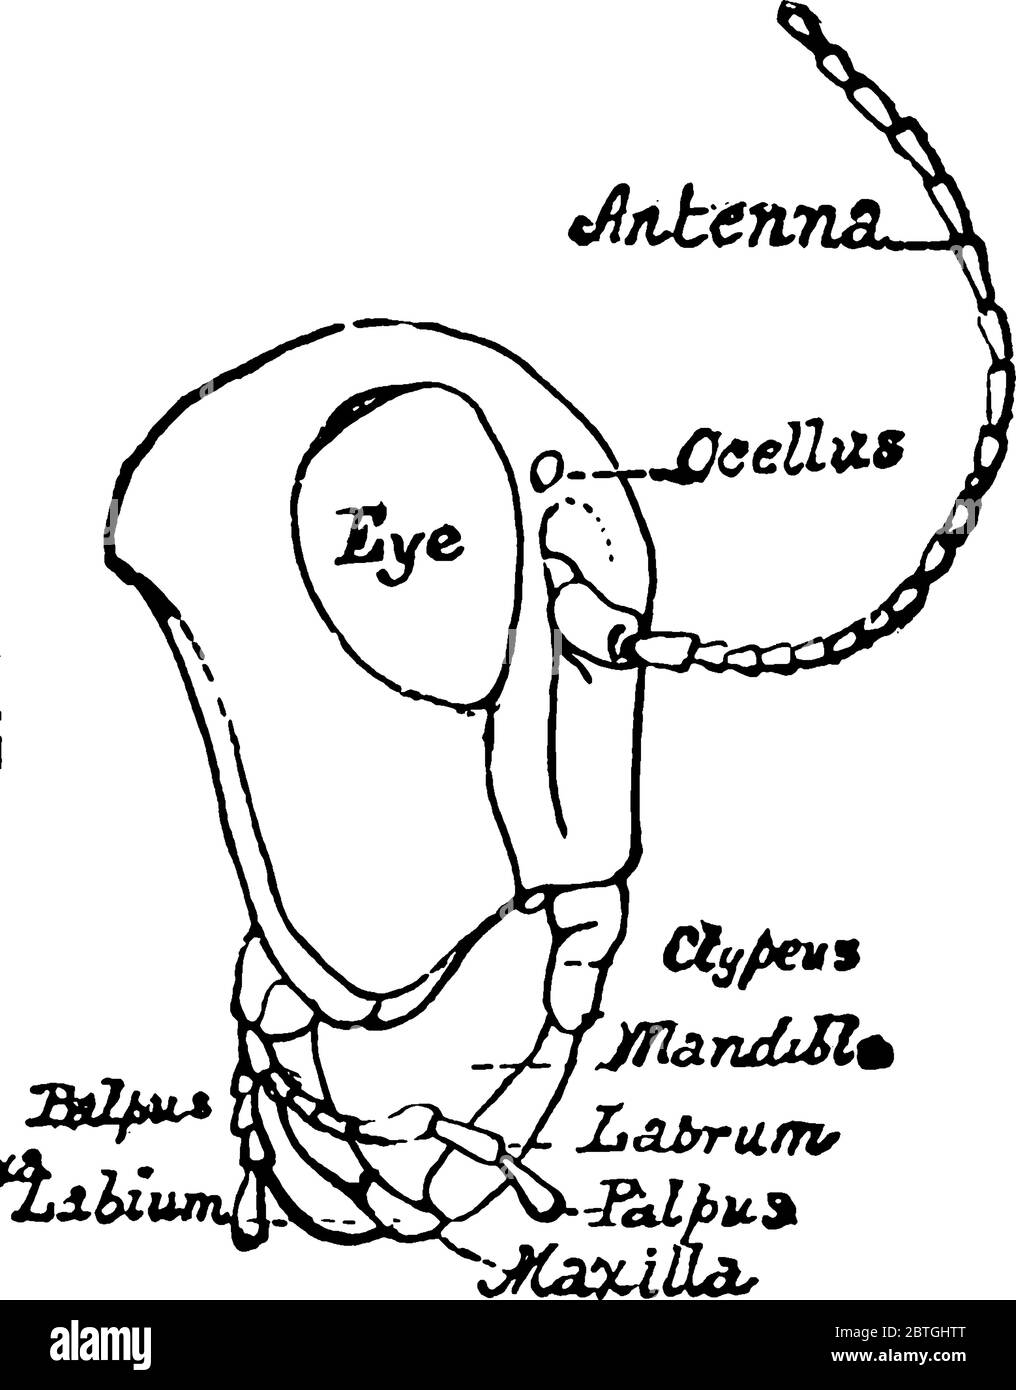 The side view of Grasshopper head, it consist of Ocellus, Compound eye, Antenna, Gena, Frons, Clypeus, Mandible, Labrum, Labium, and Pulps., vintage l Stock Vector